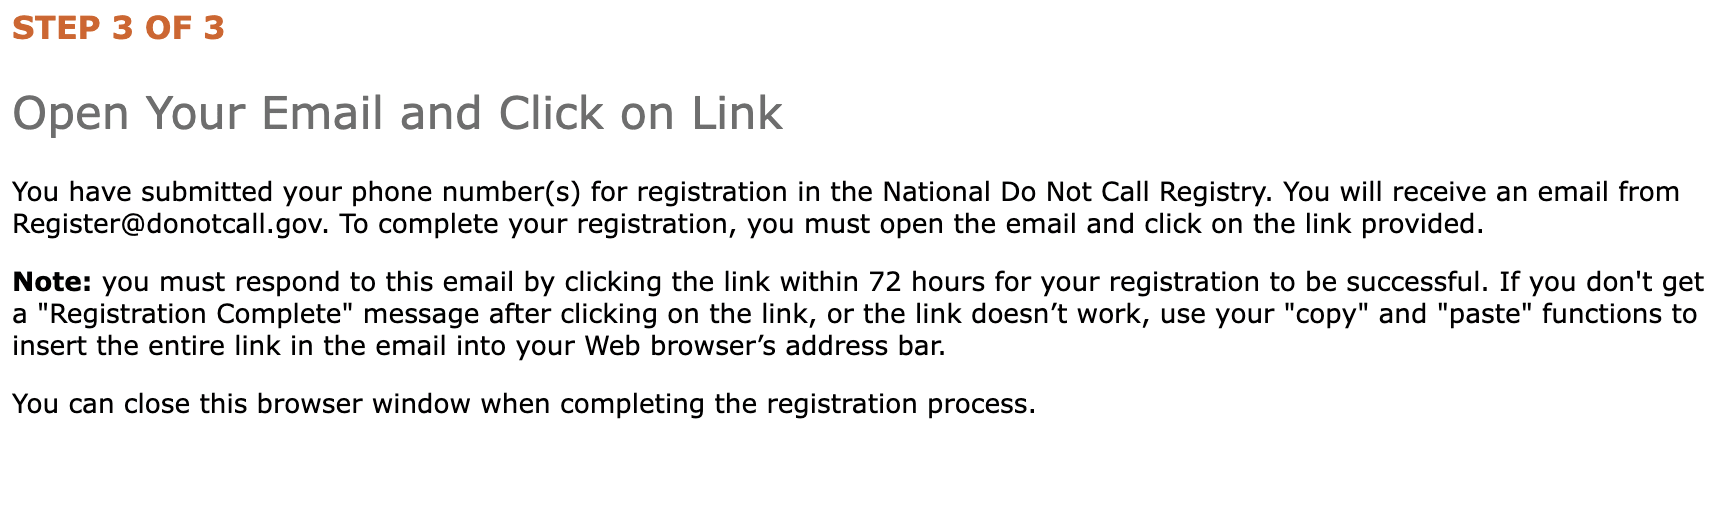 Verify Your Information Through Your Email